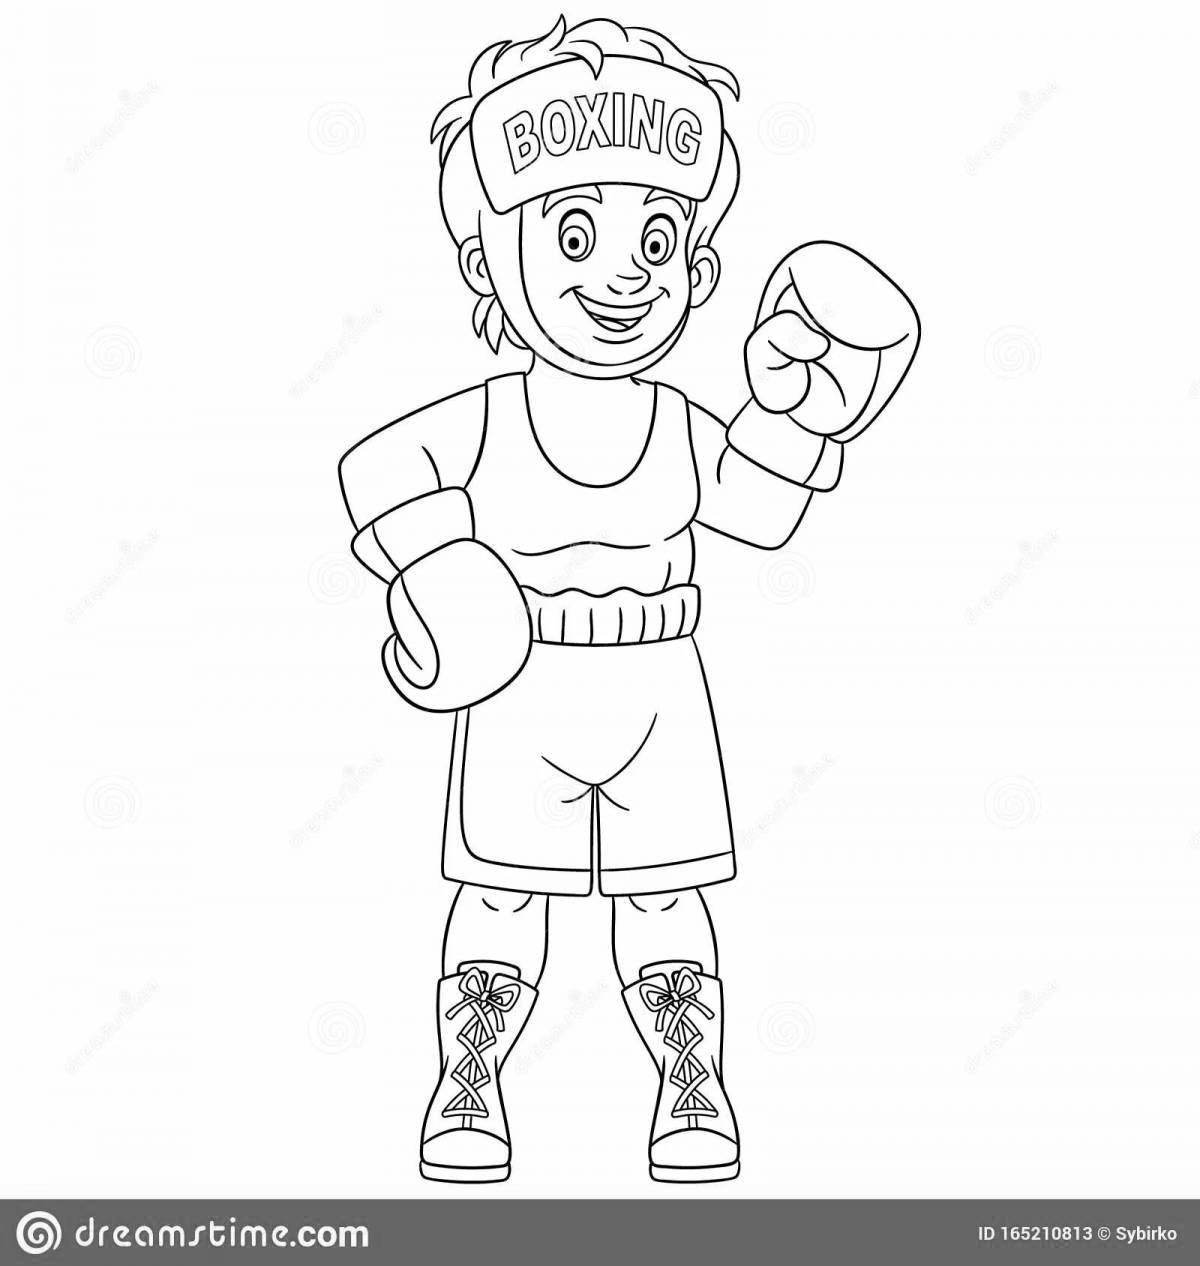 Glamorous boxing and boo coloring for kids